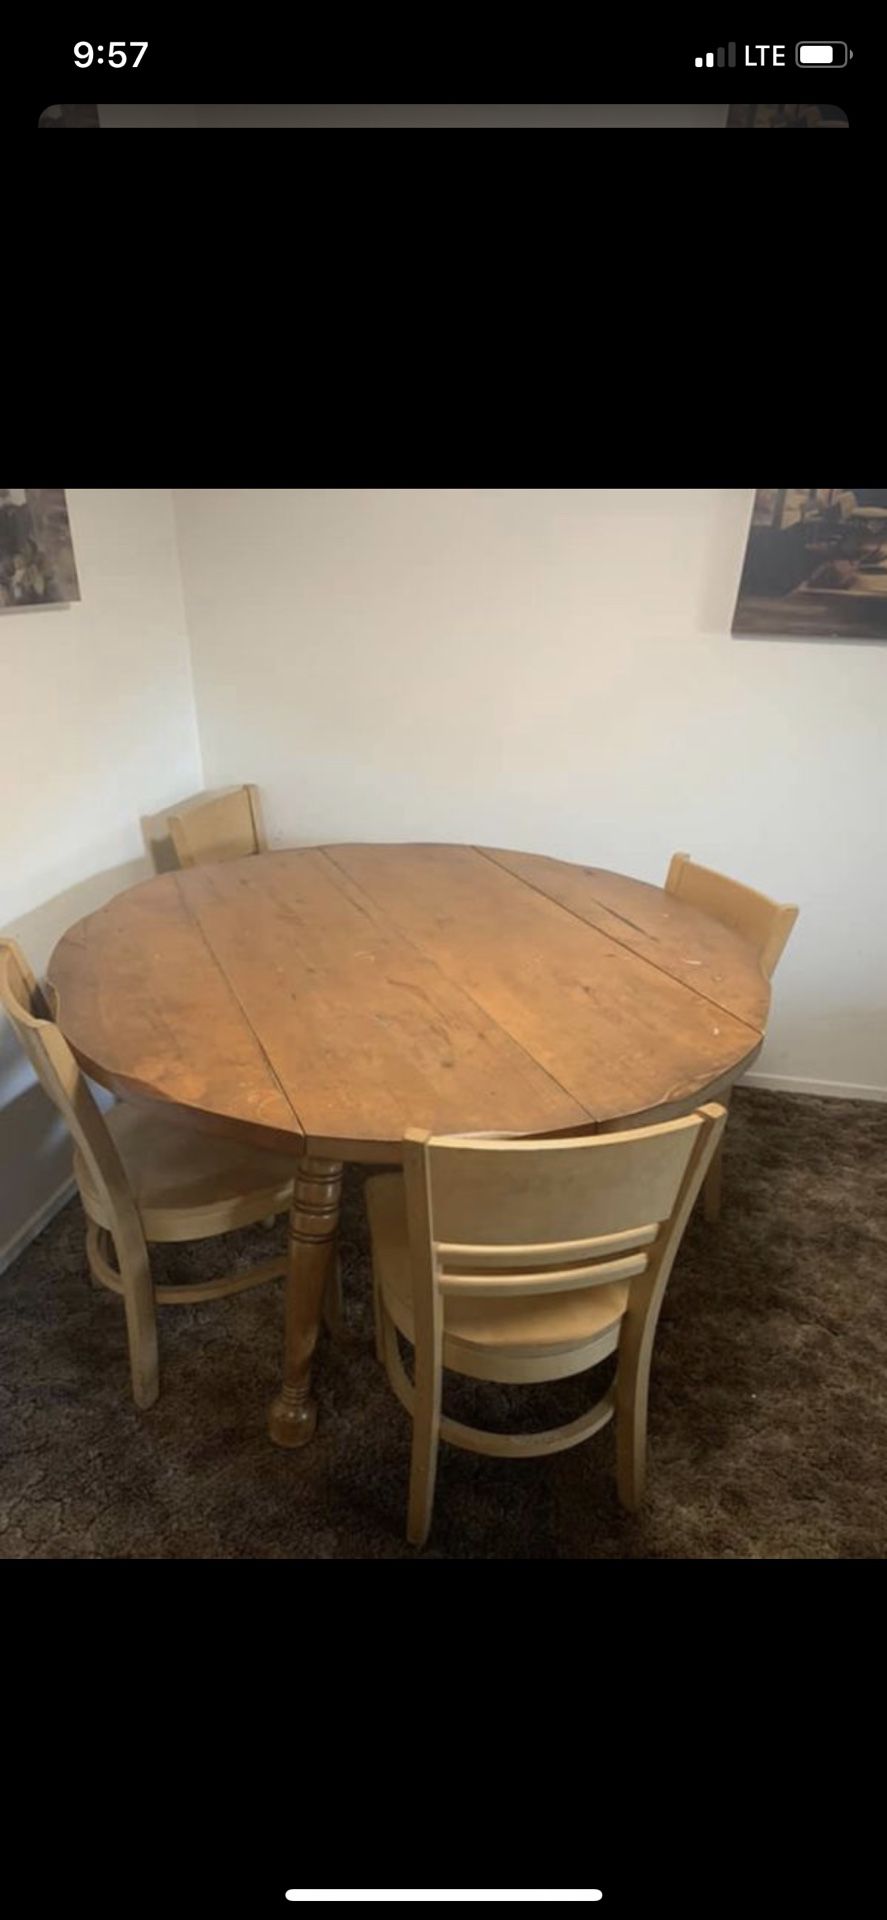 FREE Antique dining table with 4 chairs FREE